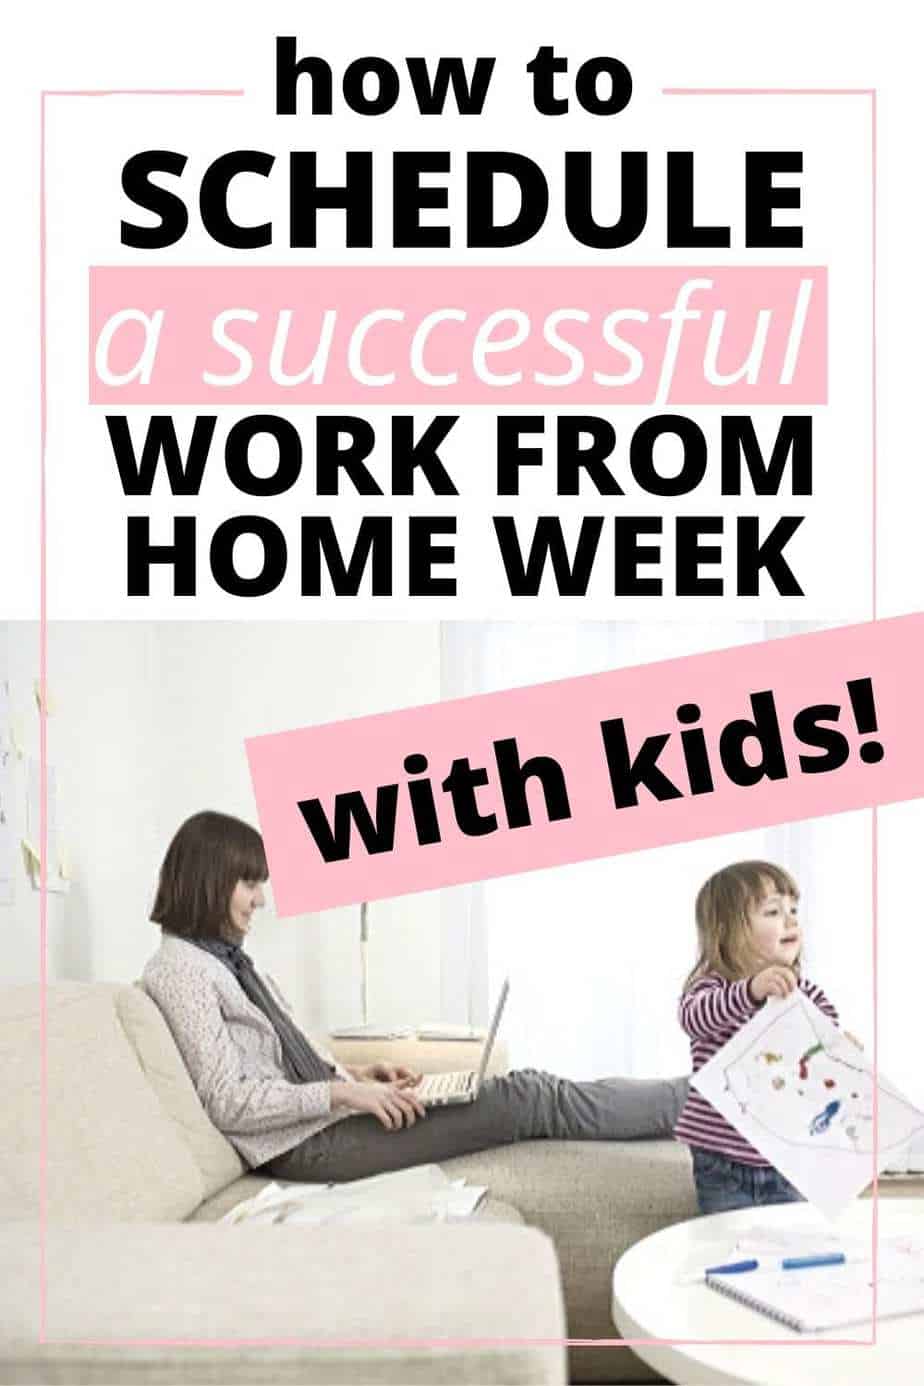 How to schedule a successful work from home week with kids